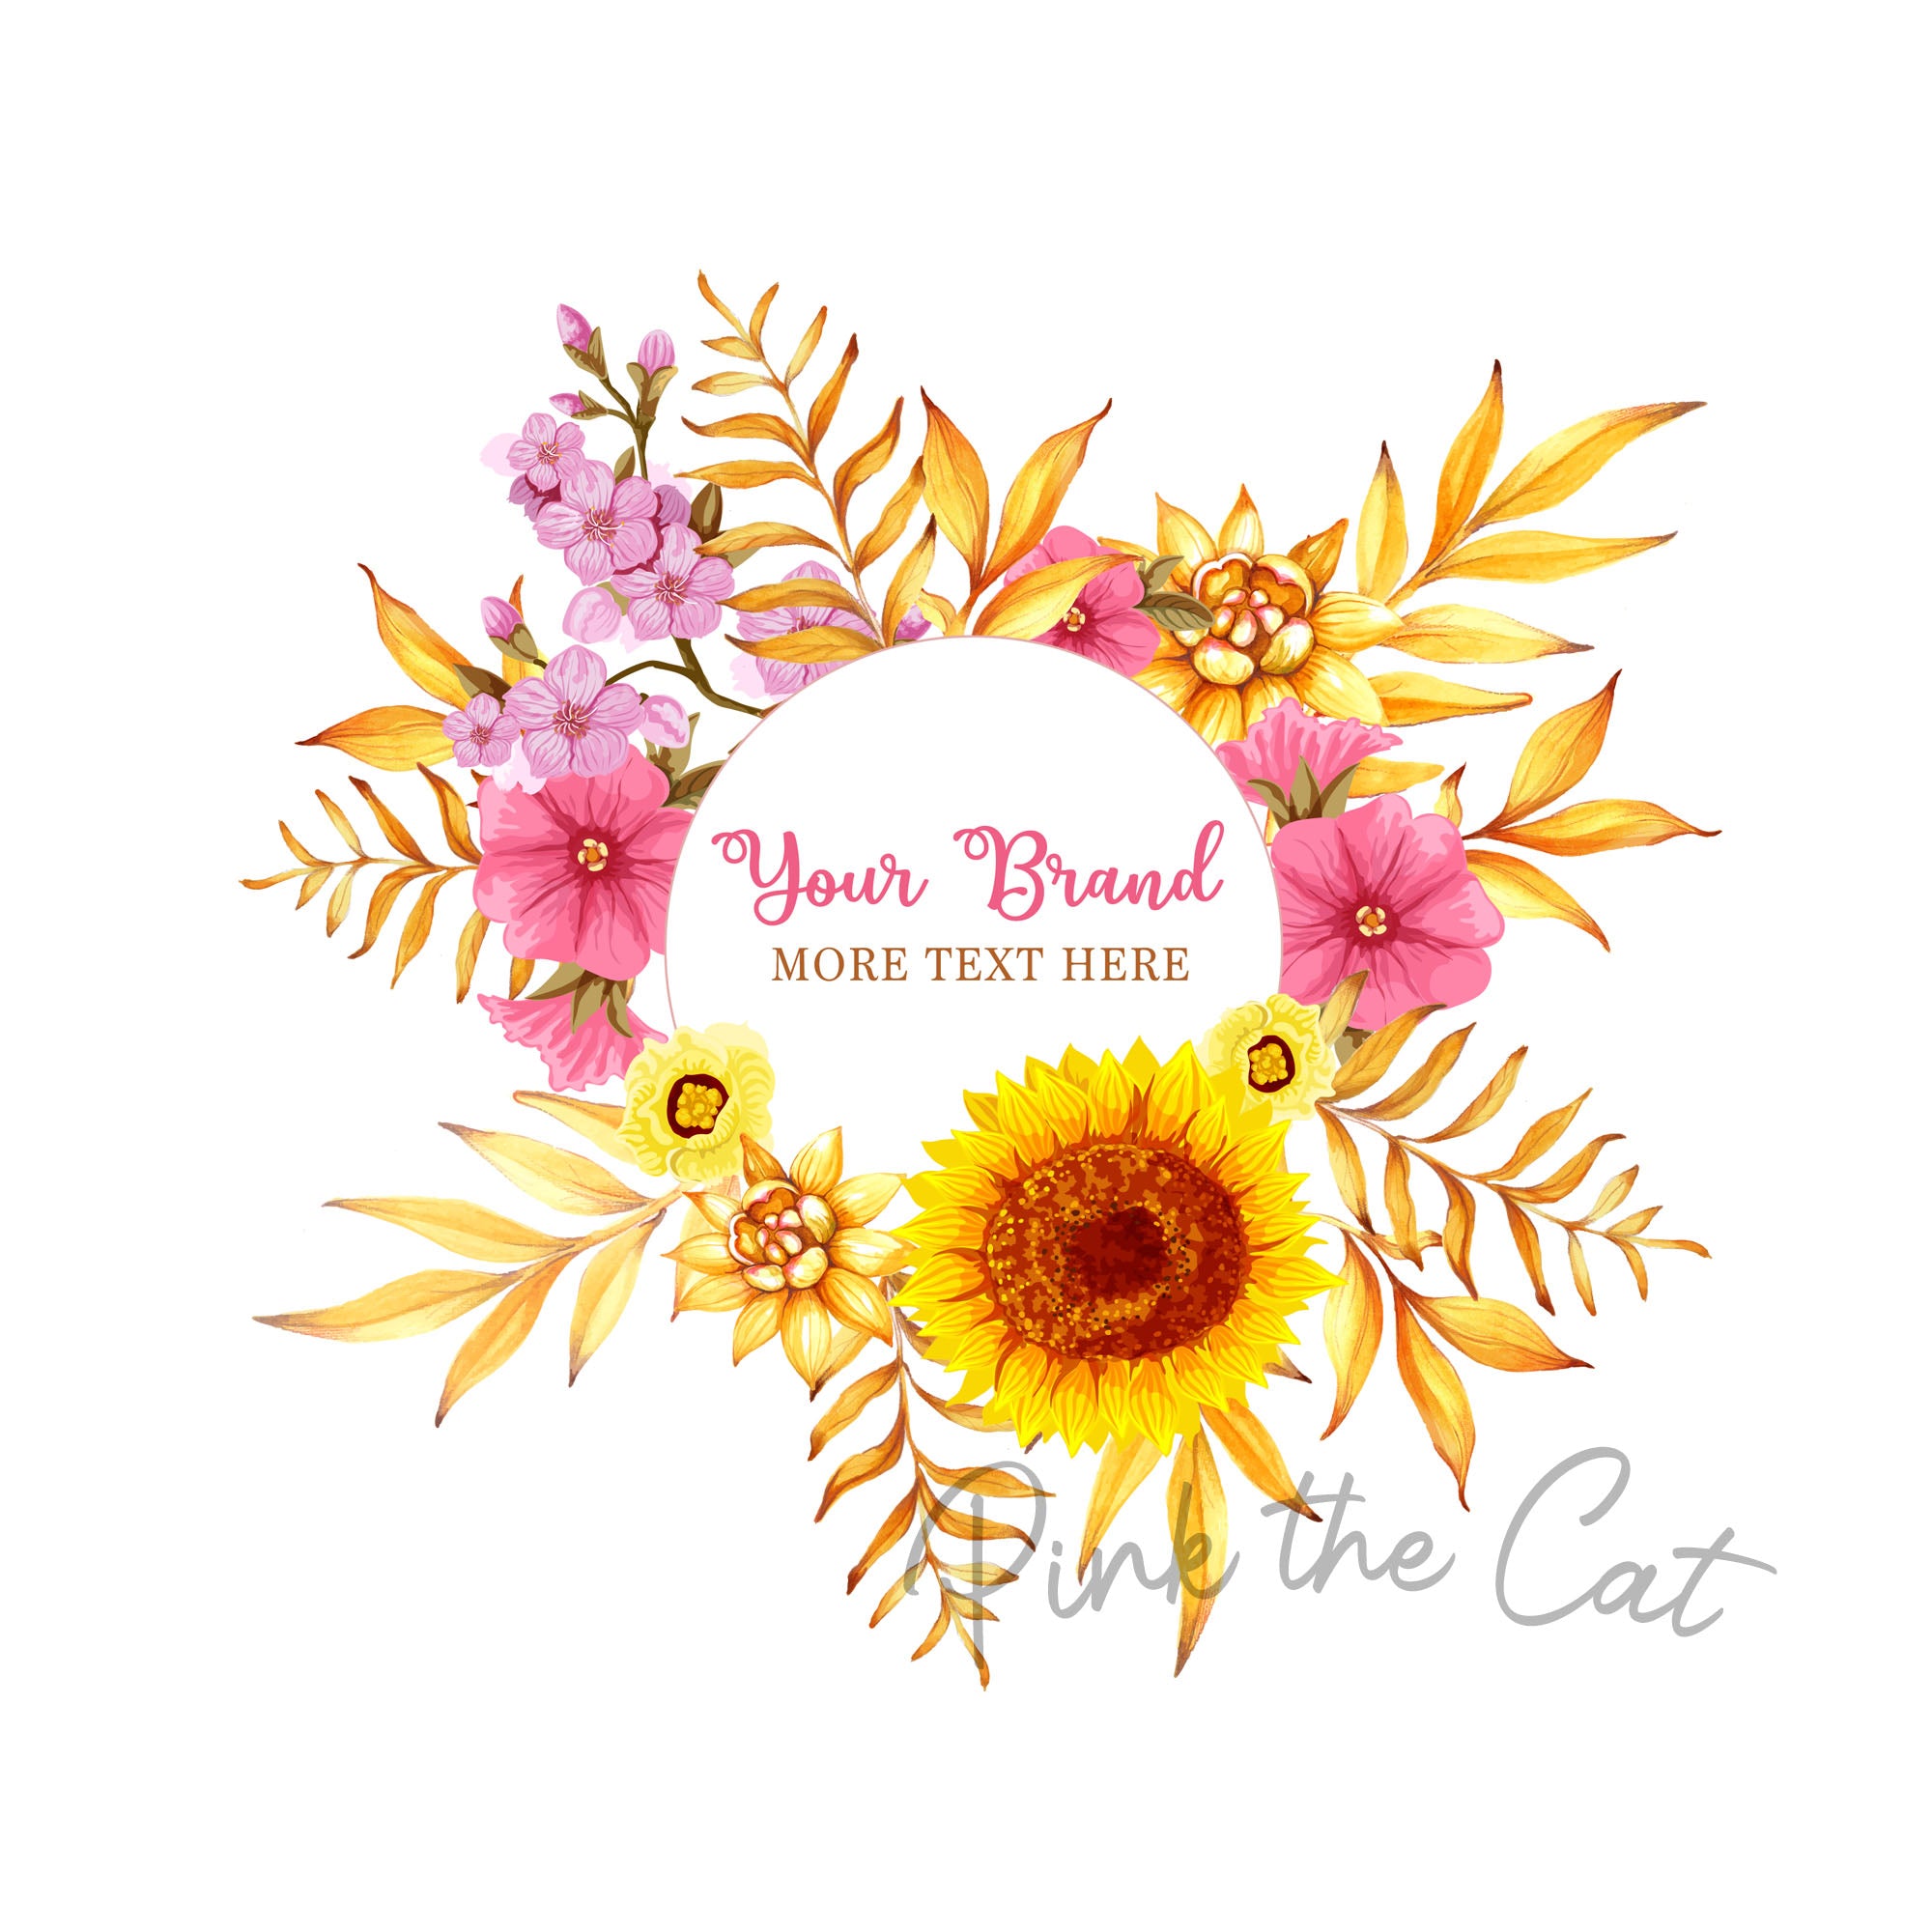 Sunflower logo watercolor premade yellow pink floral